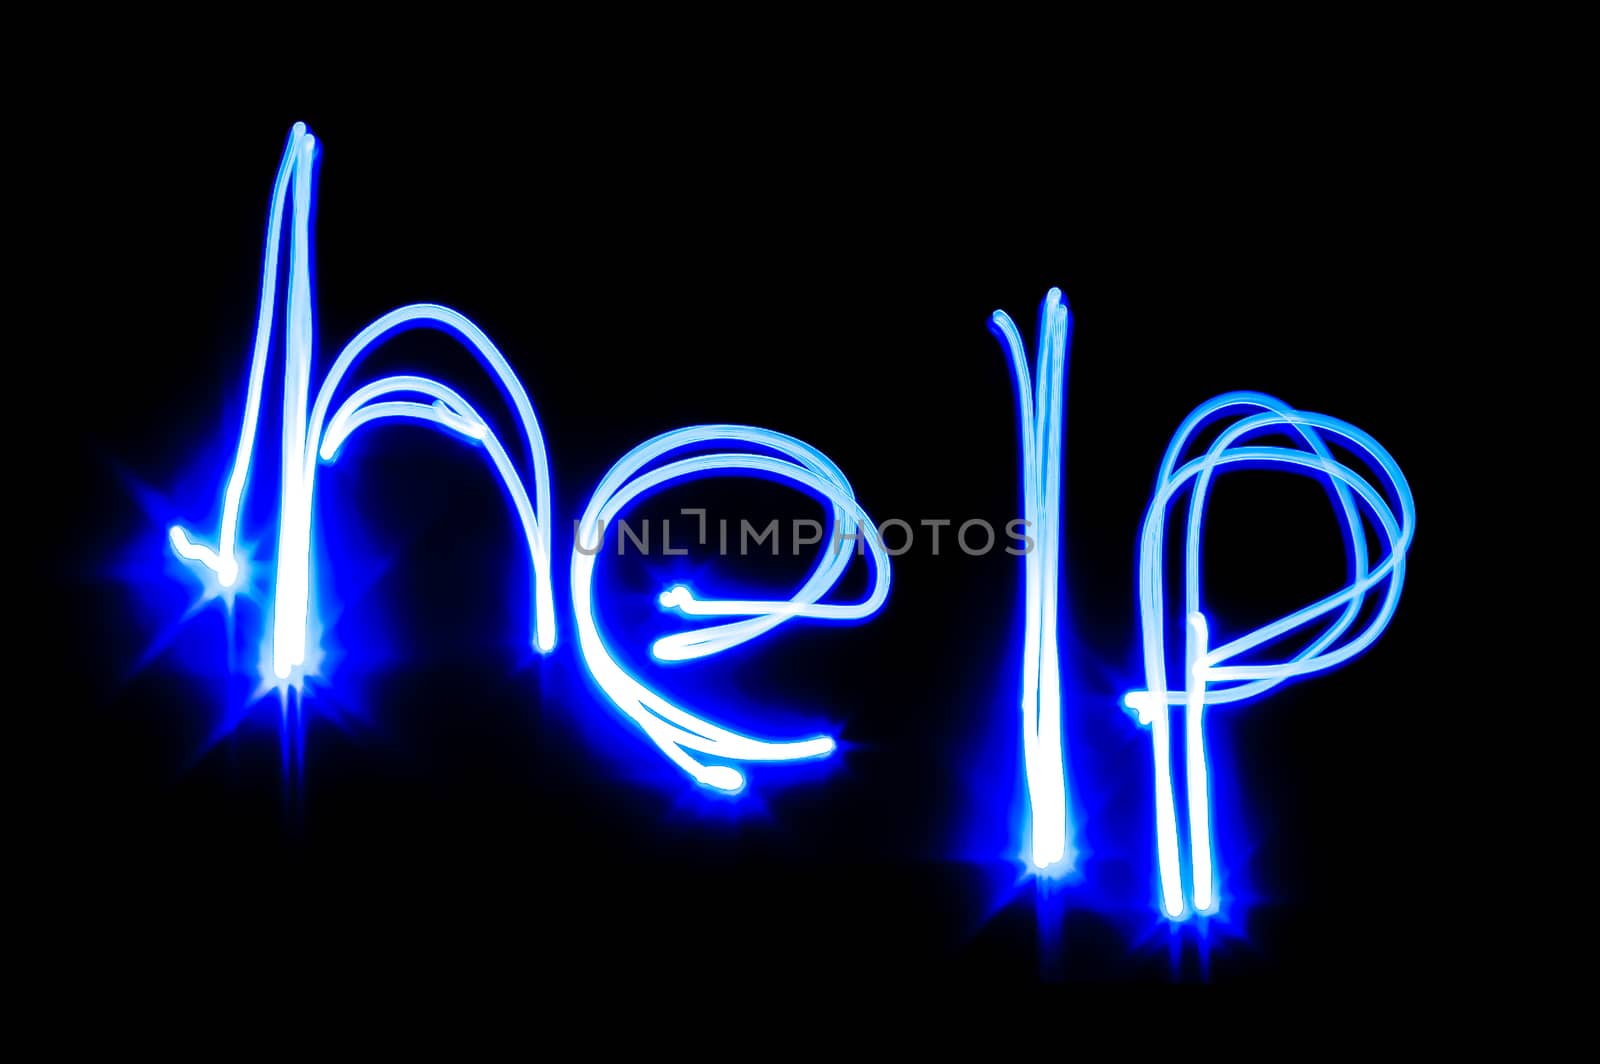 help sign written in blue light against a black background